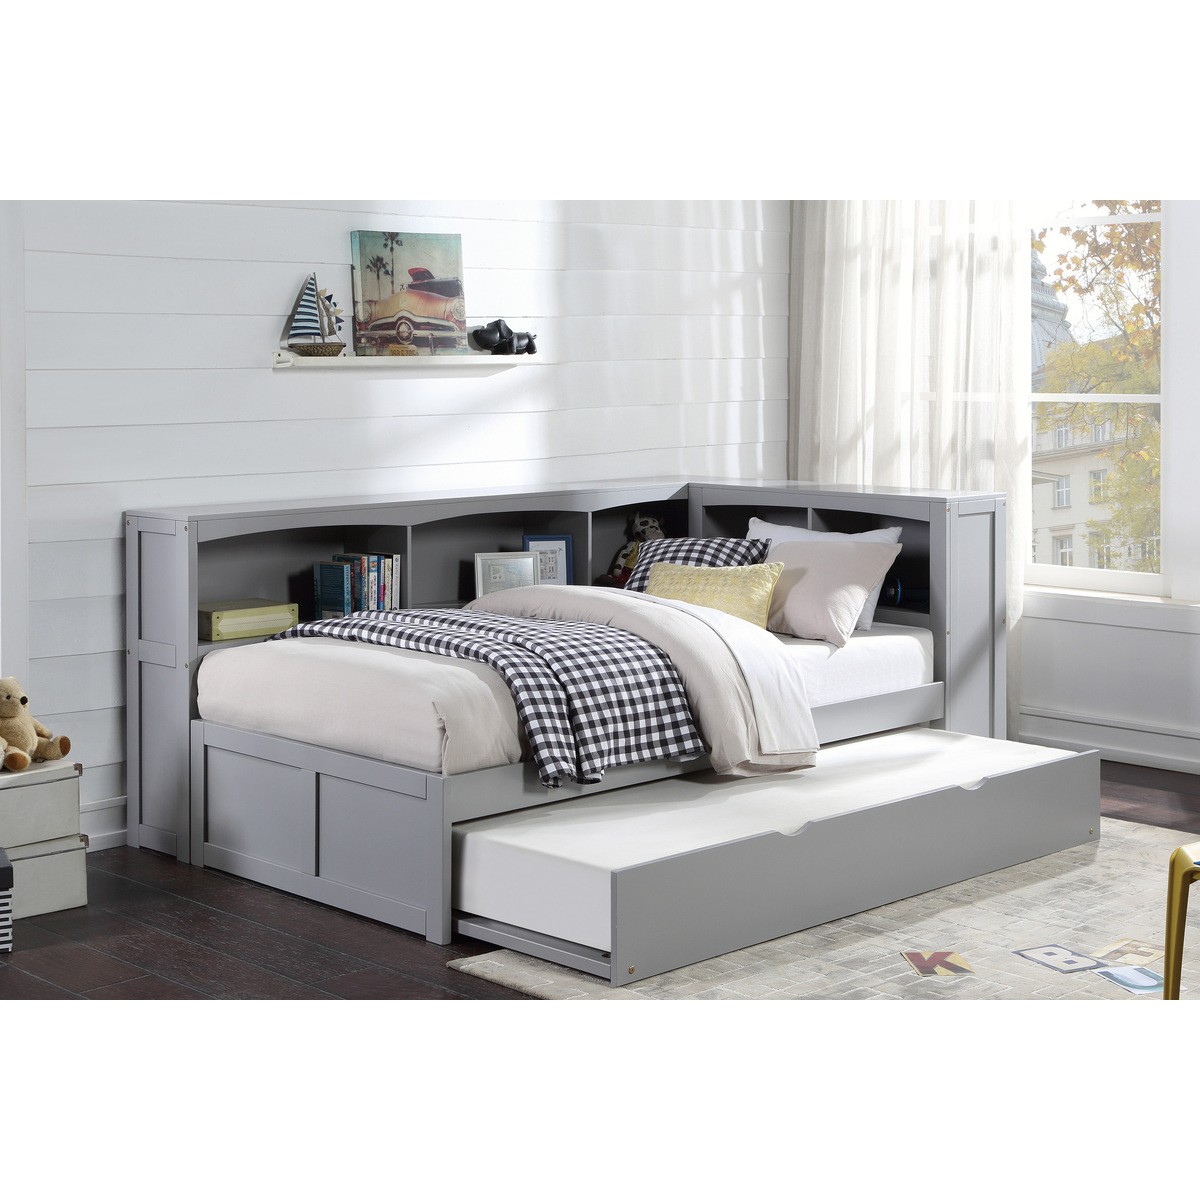 B2063bc 1bcr twin bookcase corner bed with twin trundle